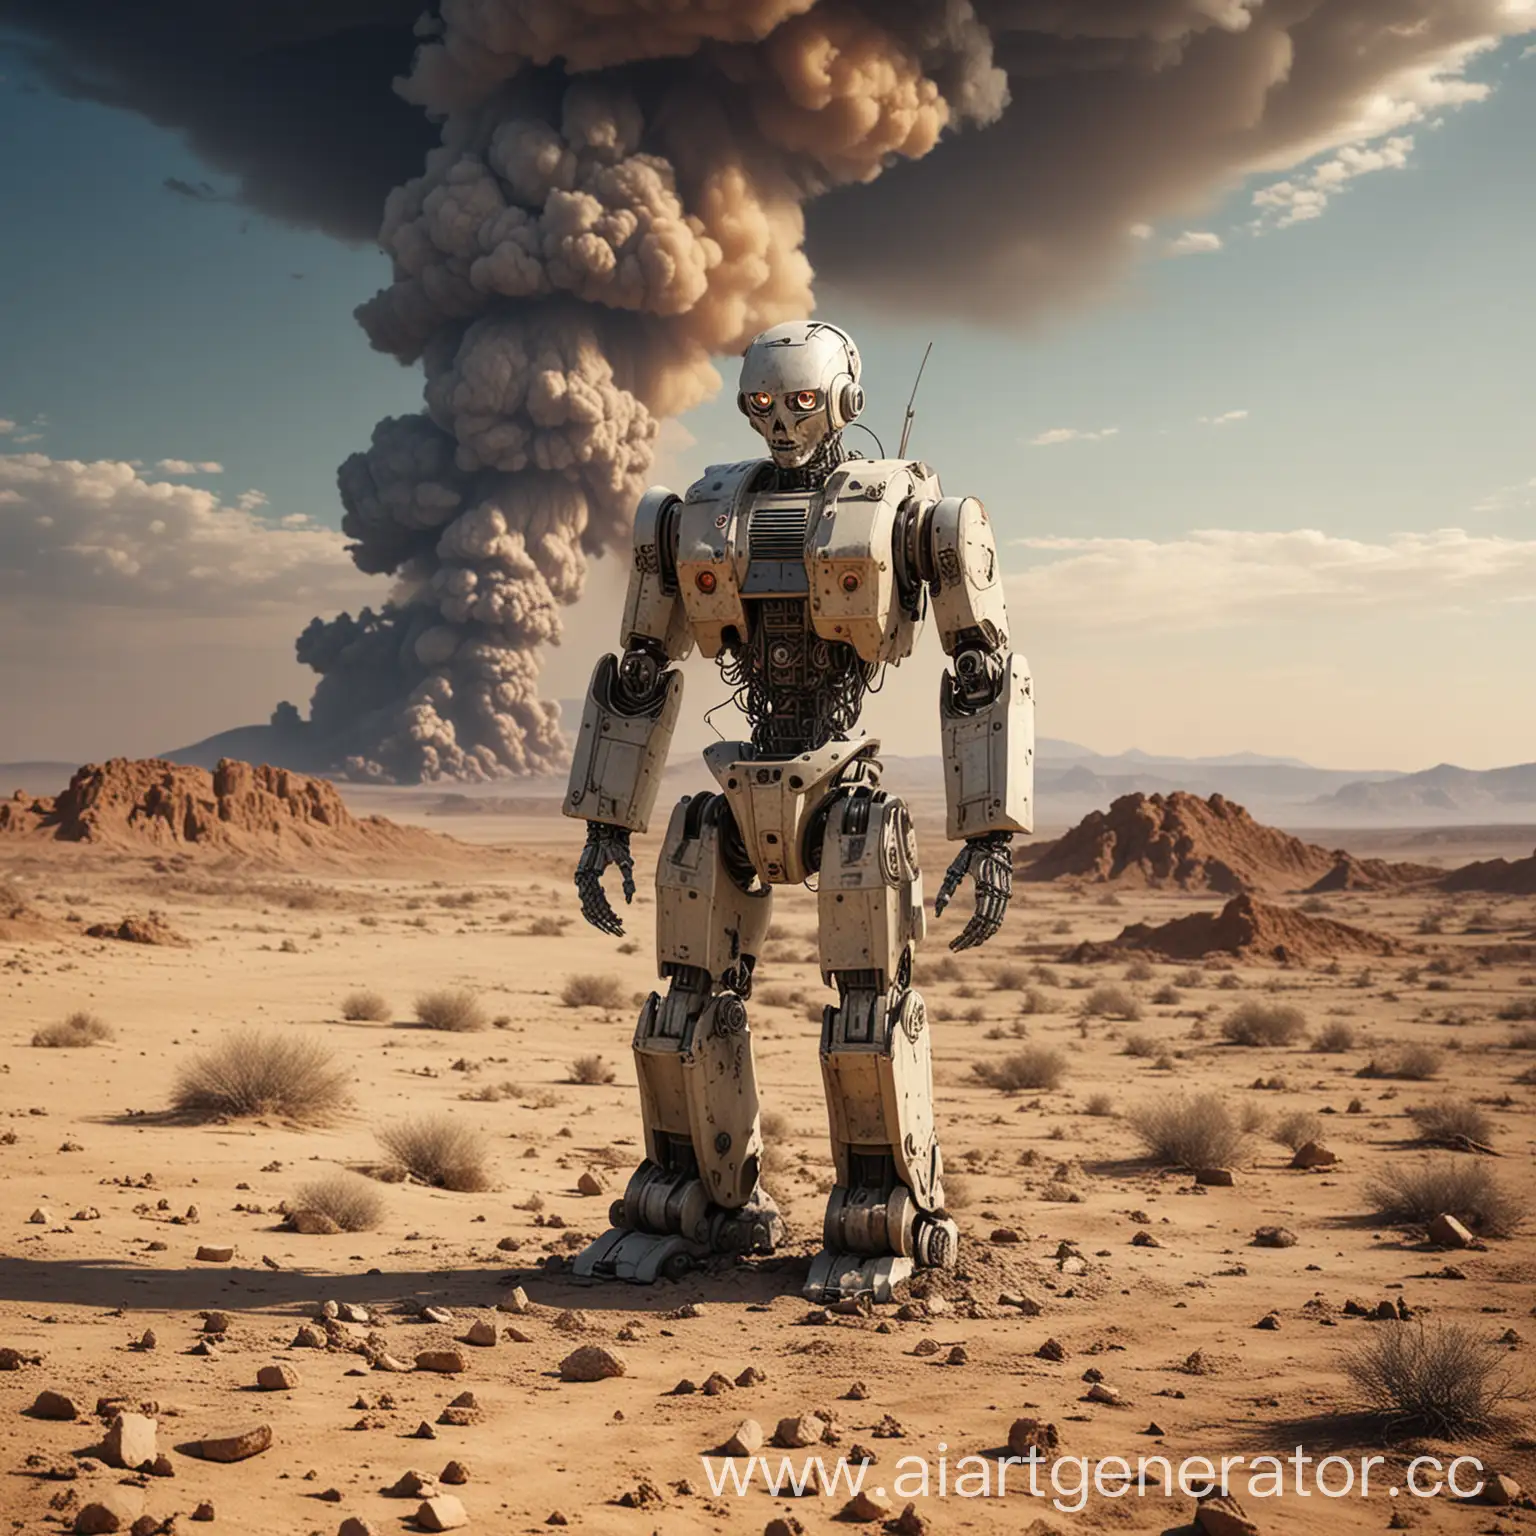 Solitary-Robot-Roaming-Desert-Wasteland-After-Nuclear-Blast